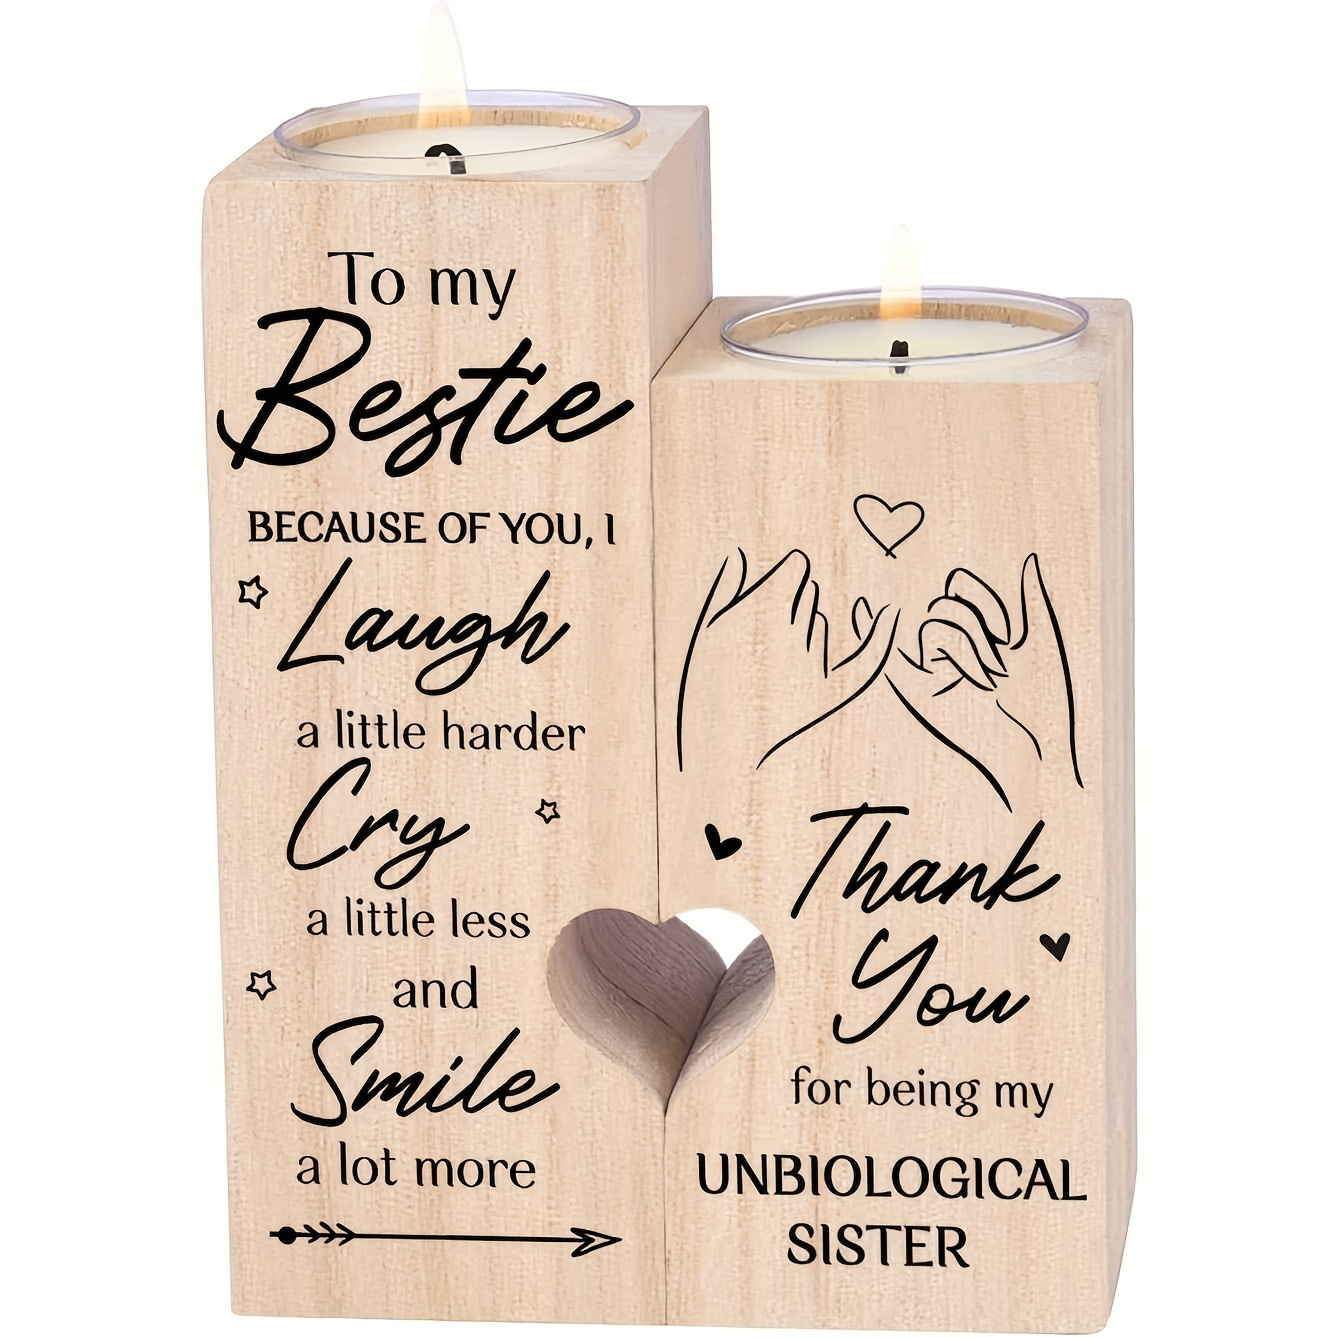 

1pc, Double Sided Printed Large Candle Holder, Double-sided Printing Candlestick Holder, To My Besite Gift Friendship Gift, Unbiological Sister Birthday Gift Candle